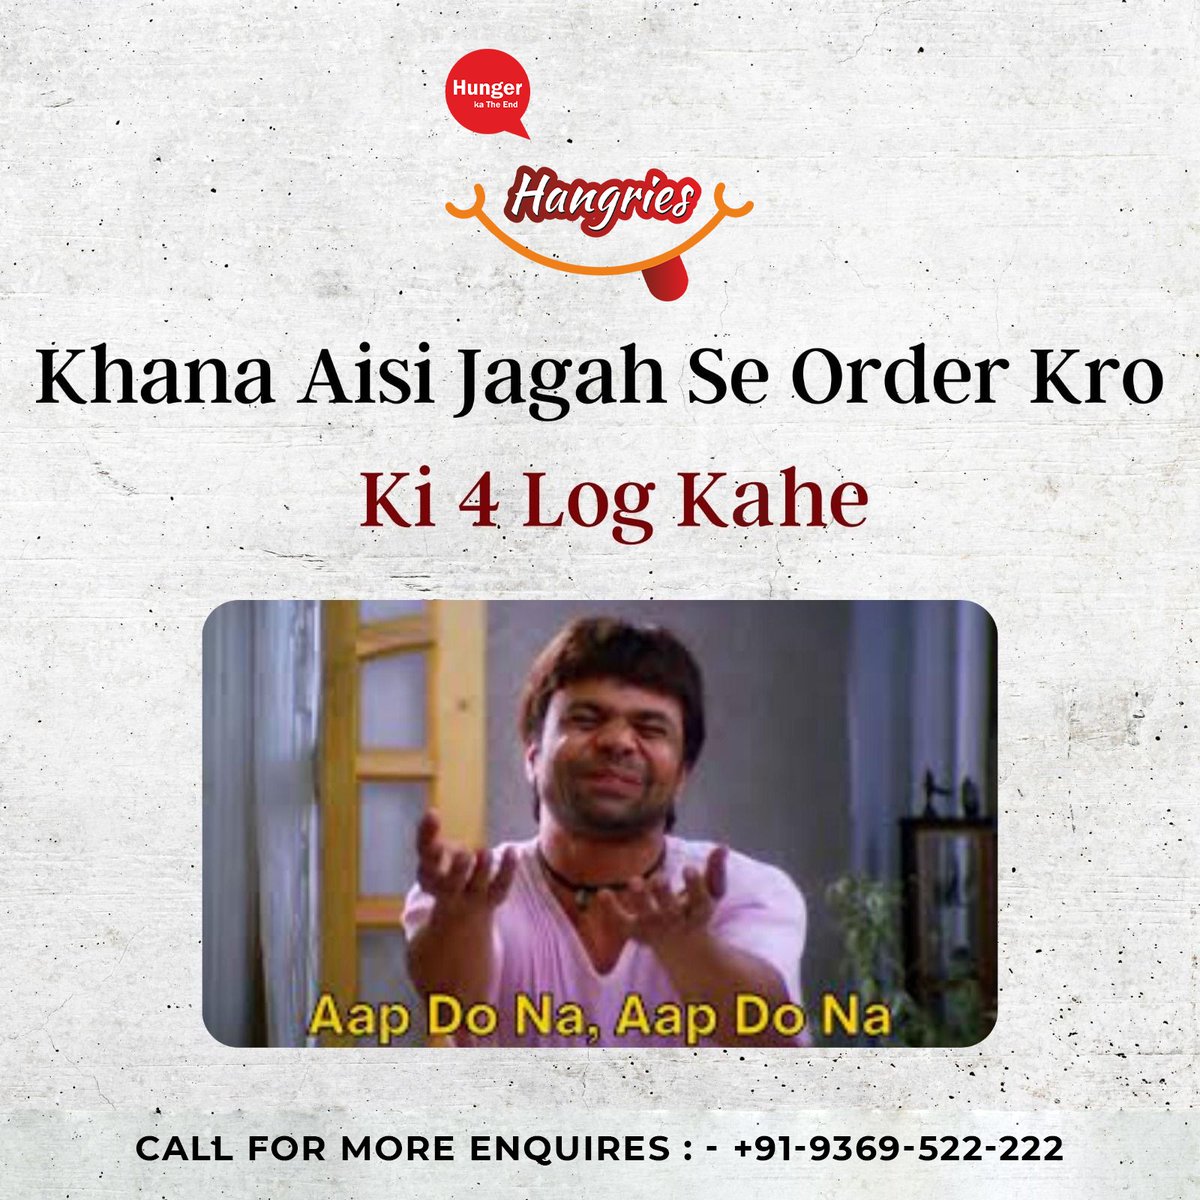 When hunger strikes, don't settle for just any fast food.  Head over to Hangries, where taste buds unite and satisfaction is guaranteed!
#hangries #fastfoodlovers #fooddelivery #orderfood #foodlove #foodies #foodiegrams #foodgasm #foodiepics #foodforall #foodheaven #foodfreak